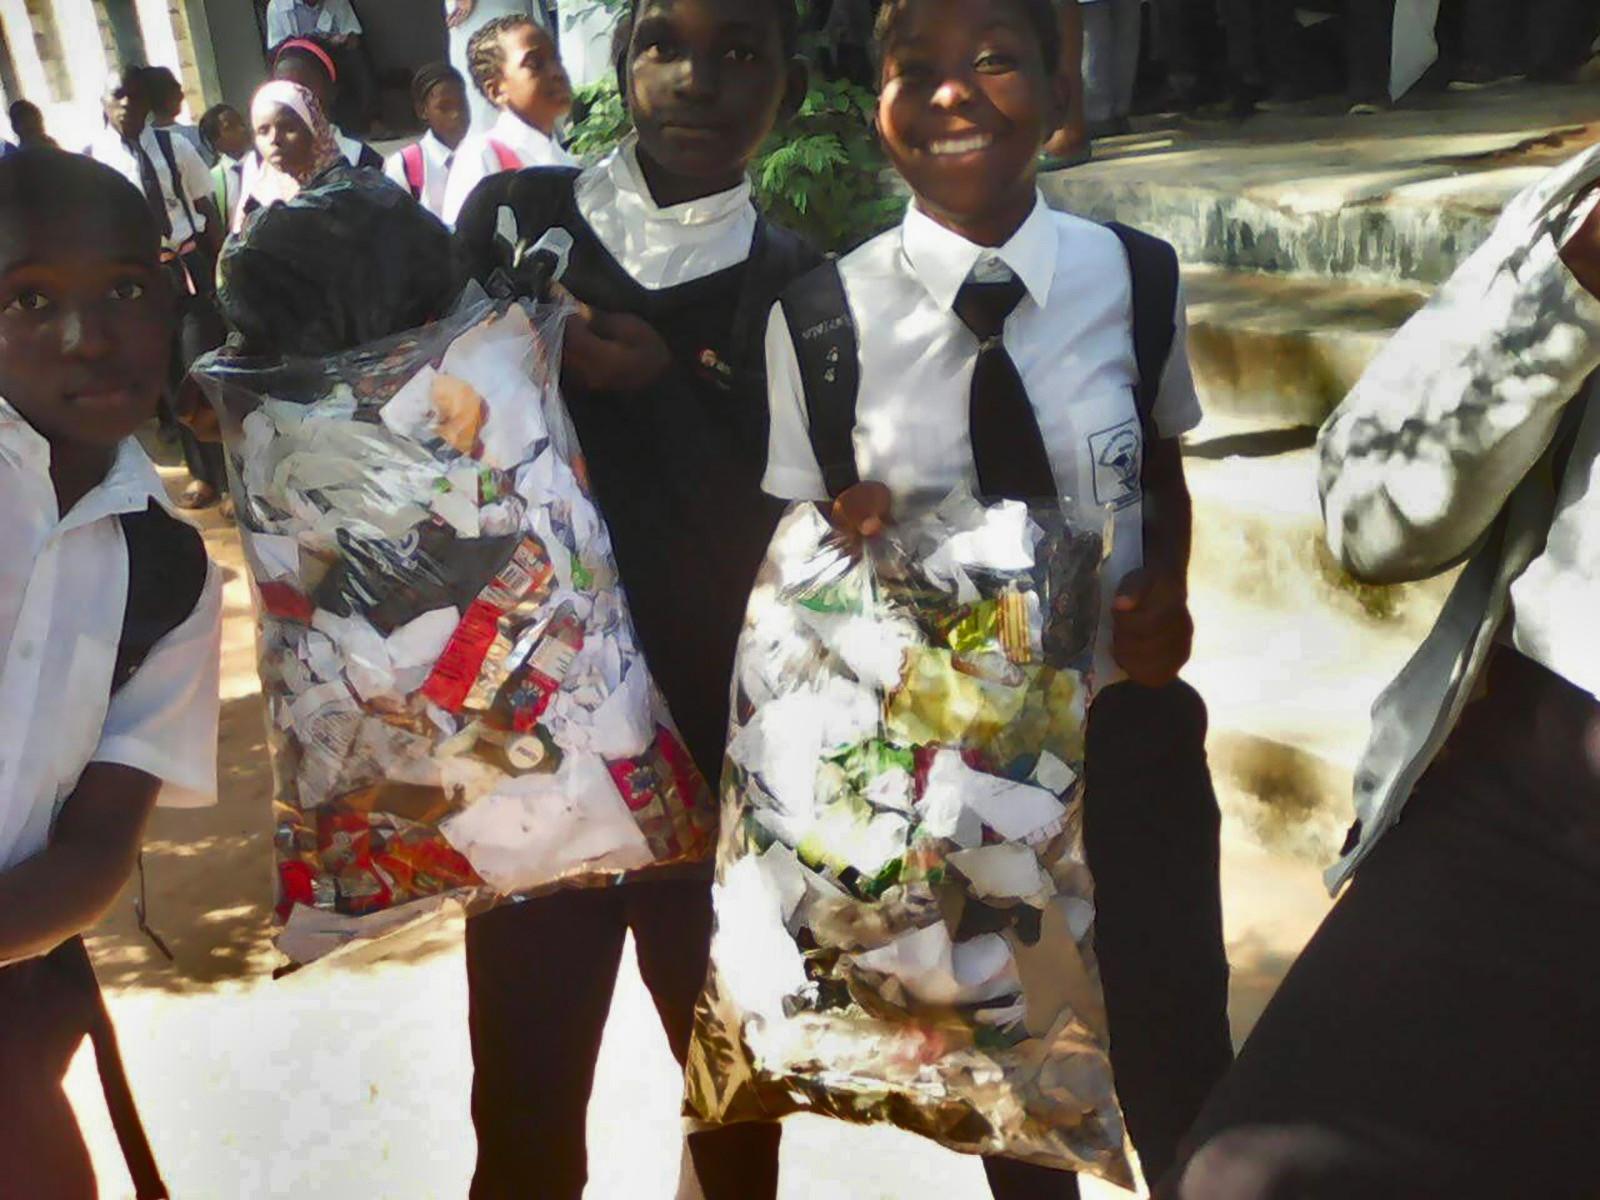 Children dressed in white shirts and tie, holding trash bags